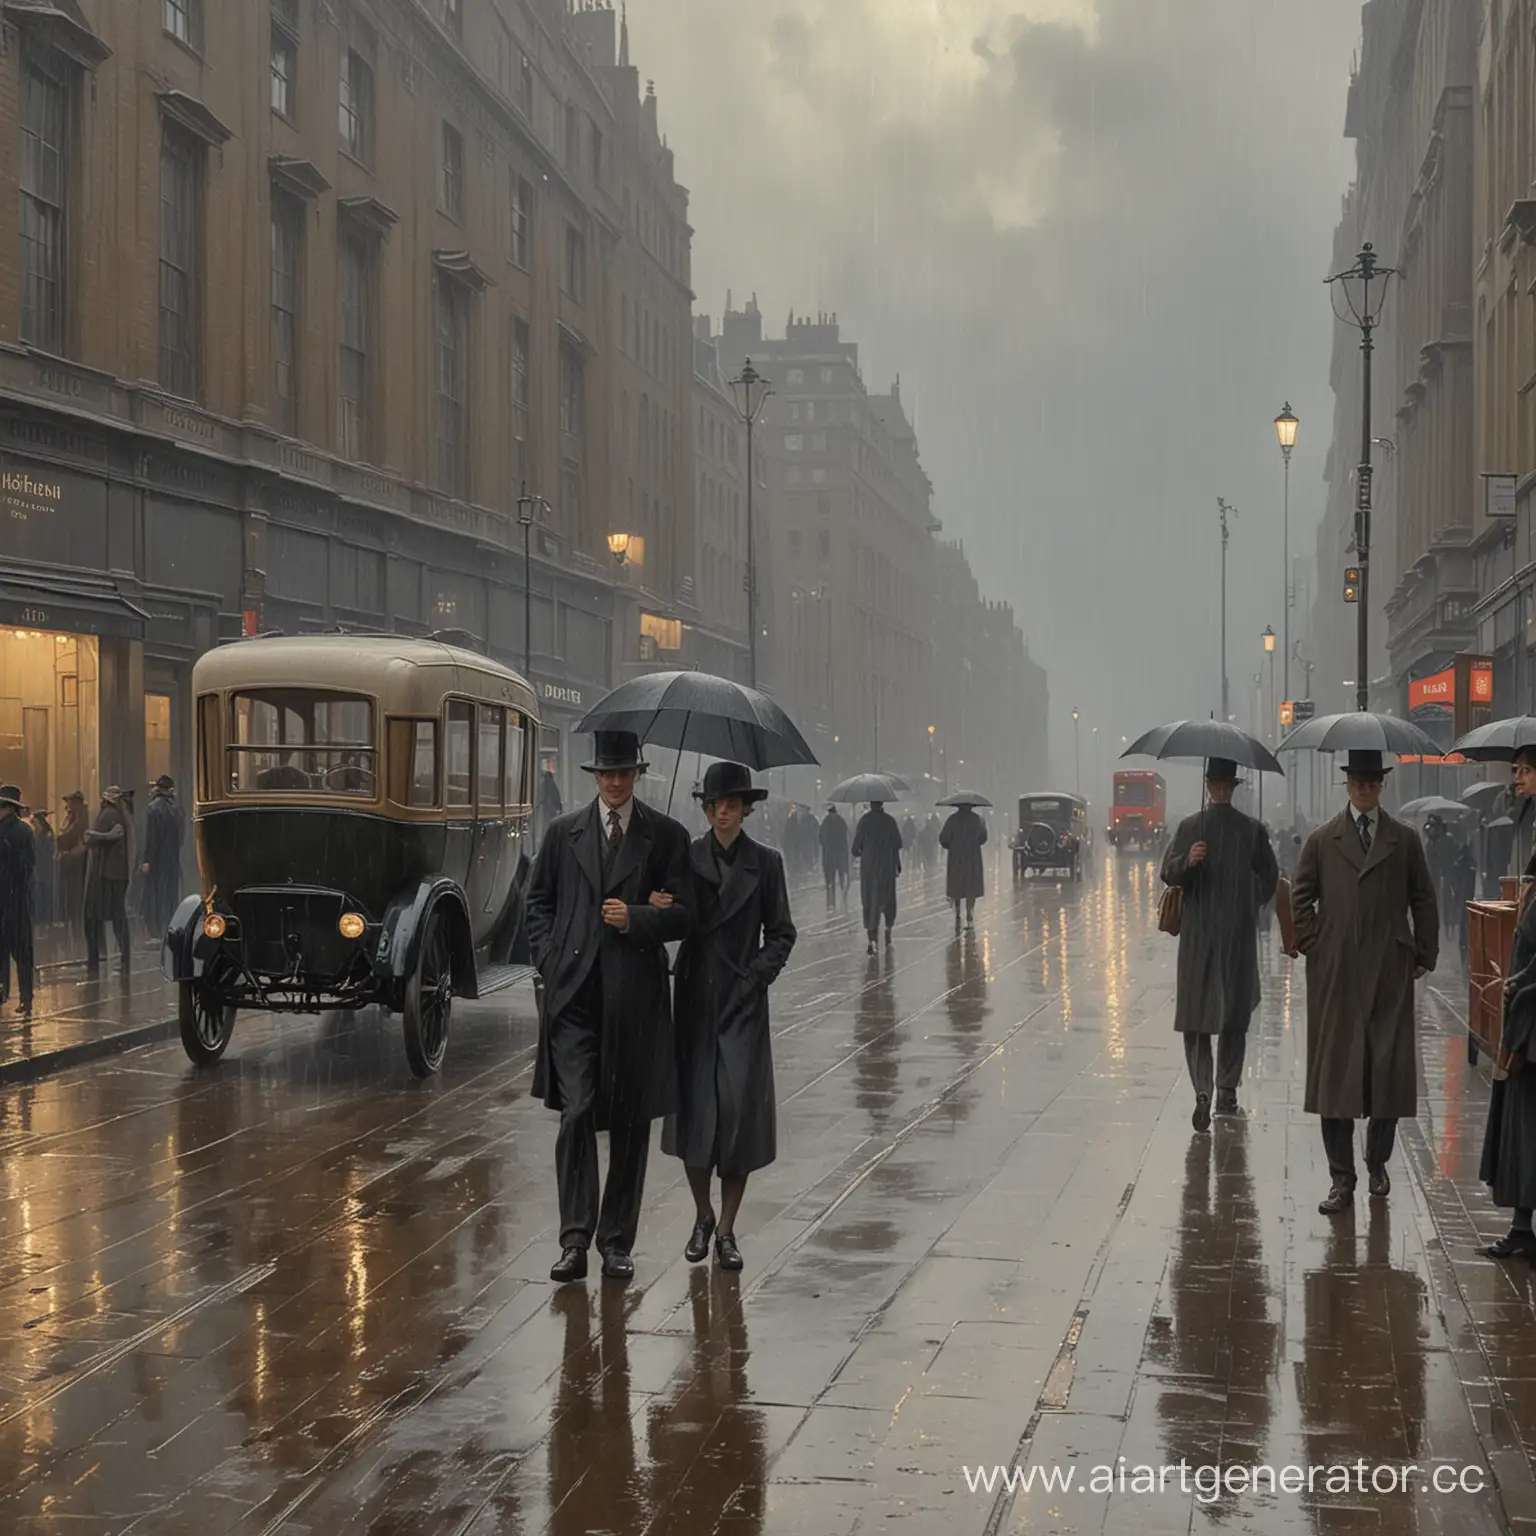 Rainy-Day-in-1920s-London-Capturing-Realism-in-Excellent-Quality